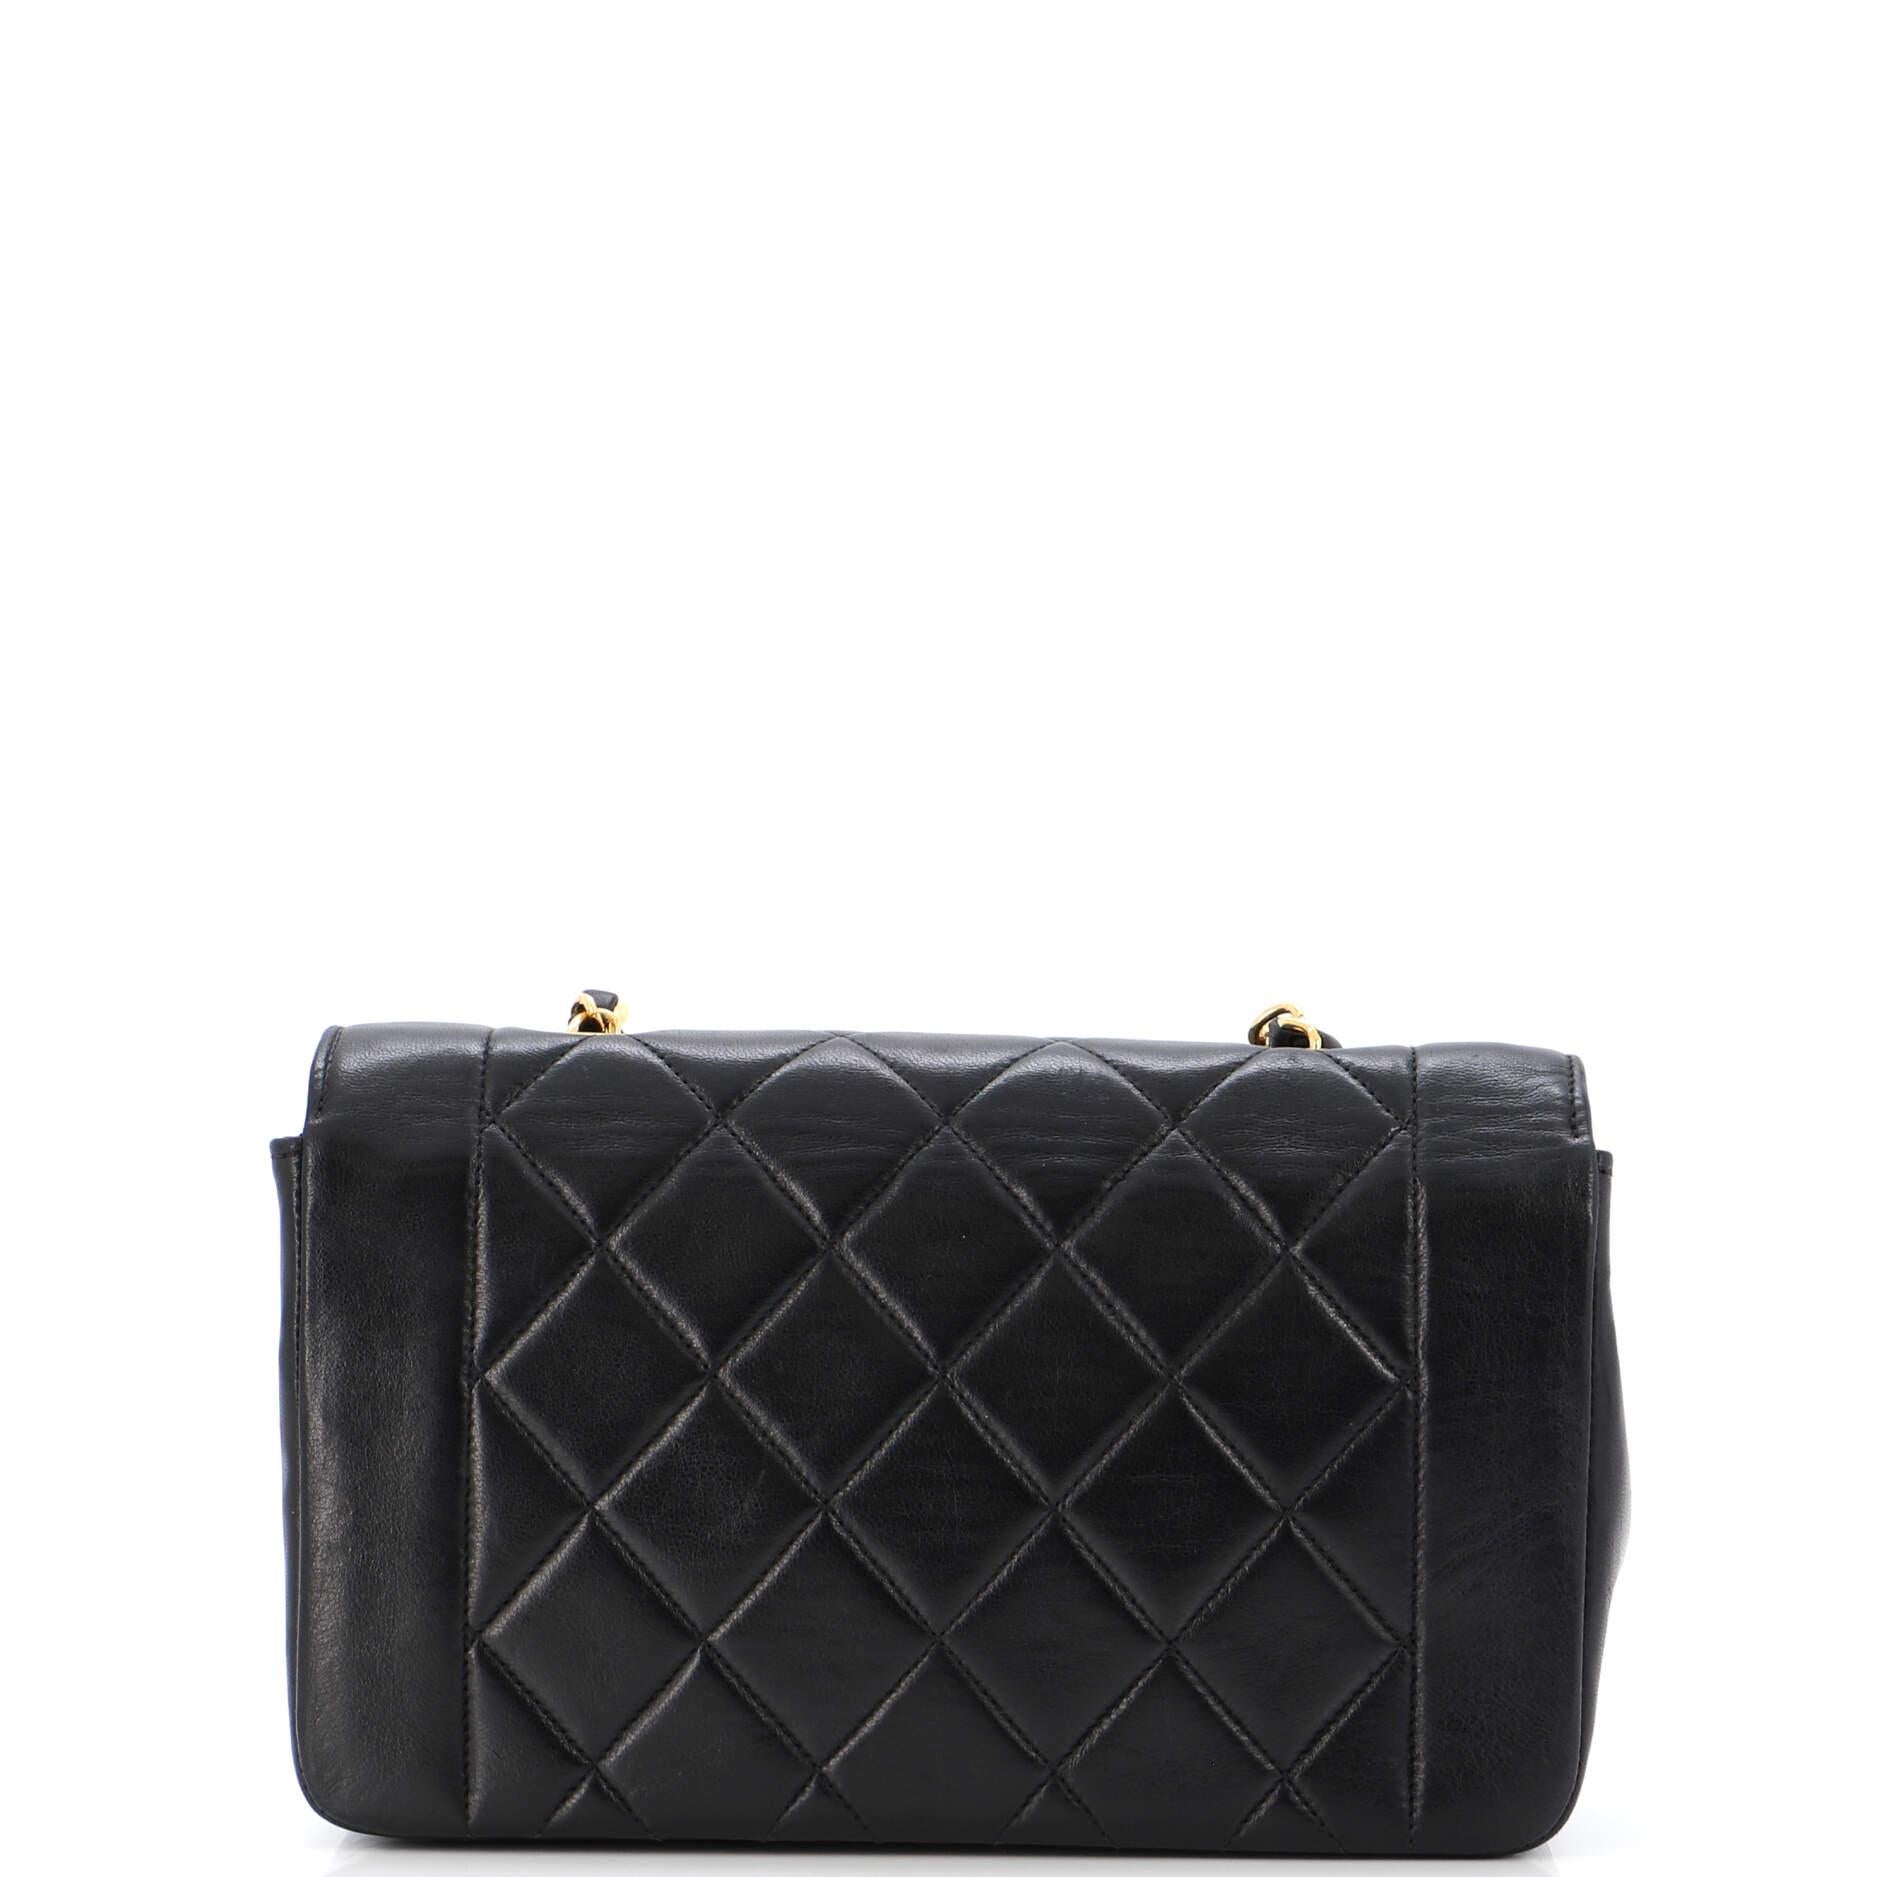 Women's Chanel Vintage Diana Flap Bag Quilted Lambskin Small